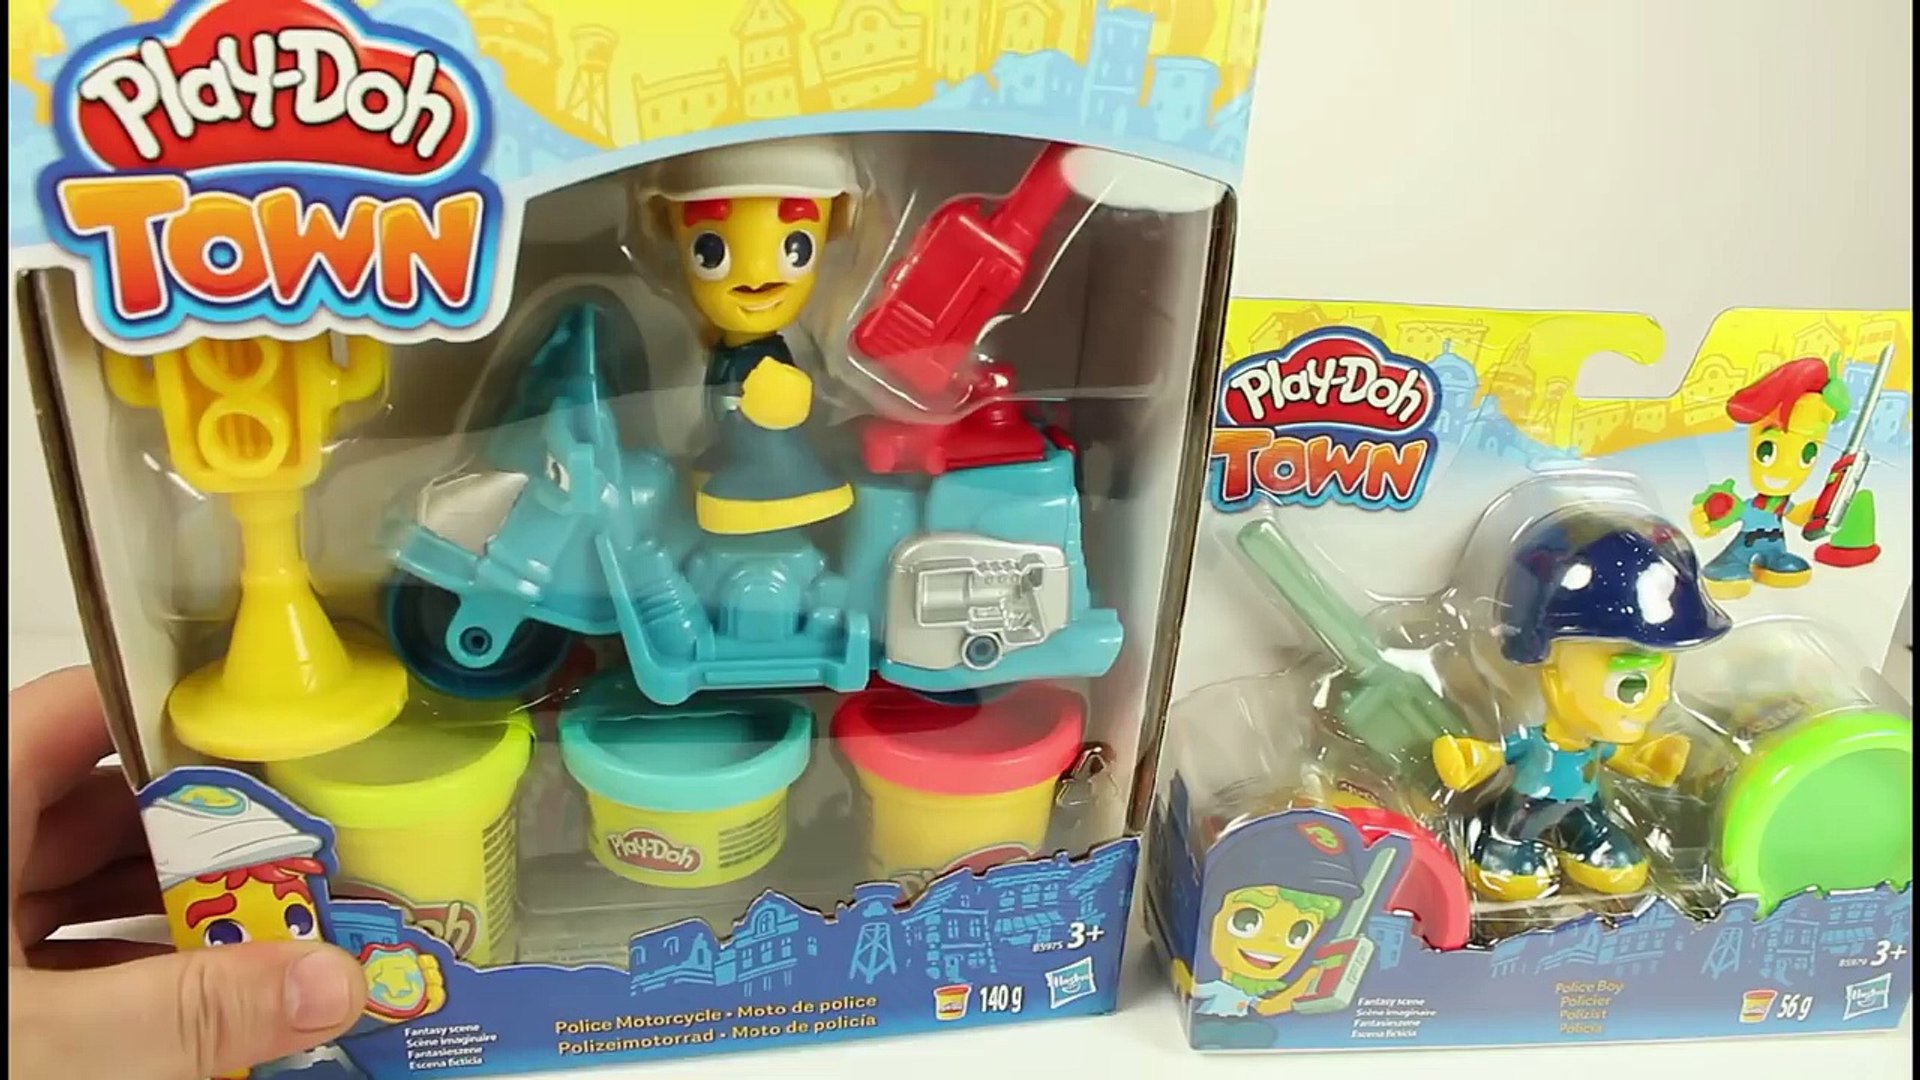 Play-Doh Town Police Motorcycle Hasbro Play-Doh Play Set NEW IN BOX 